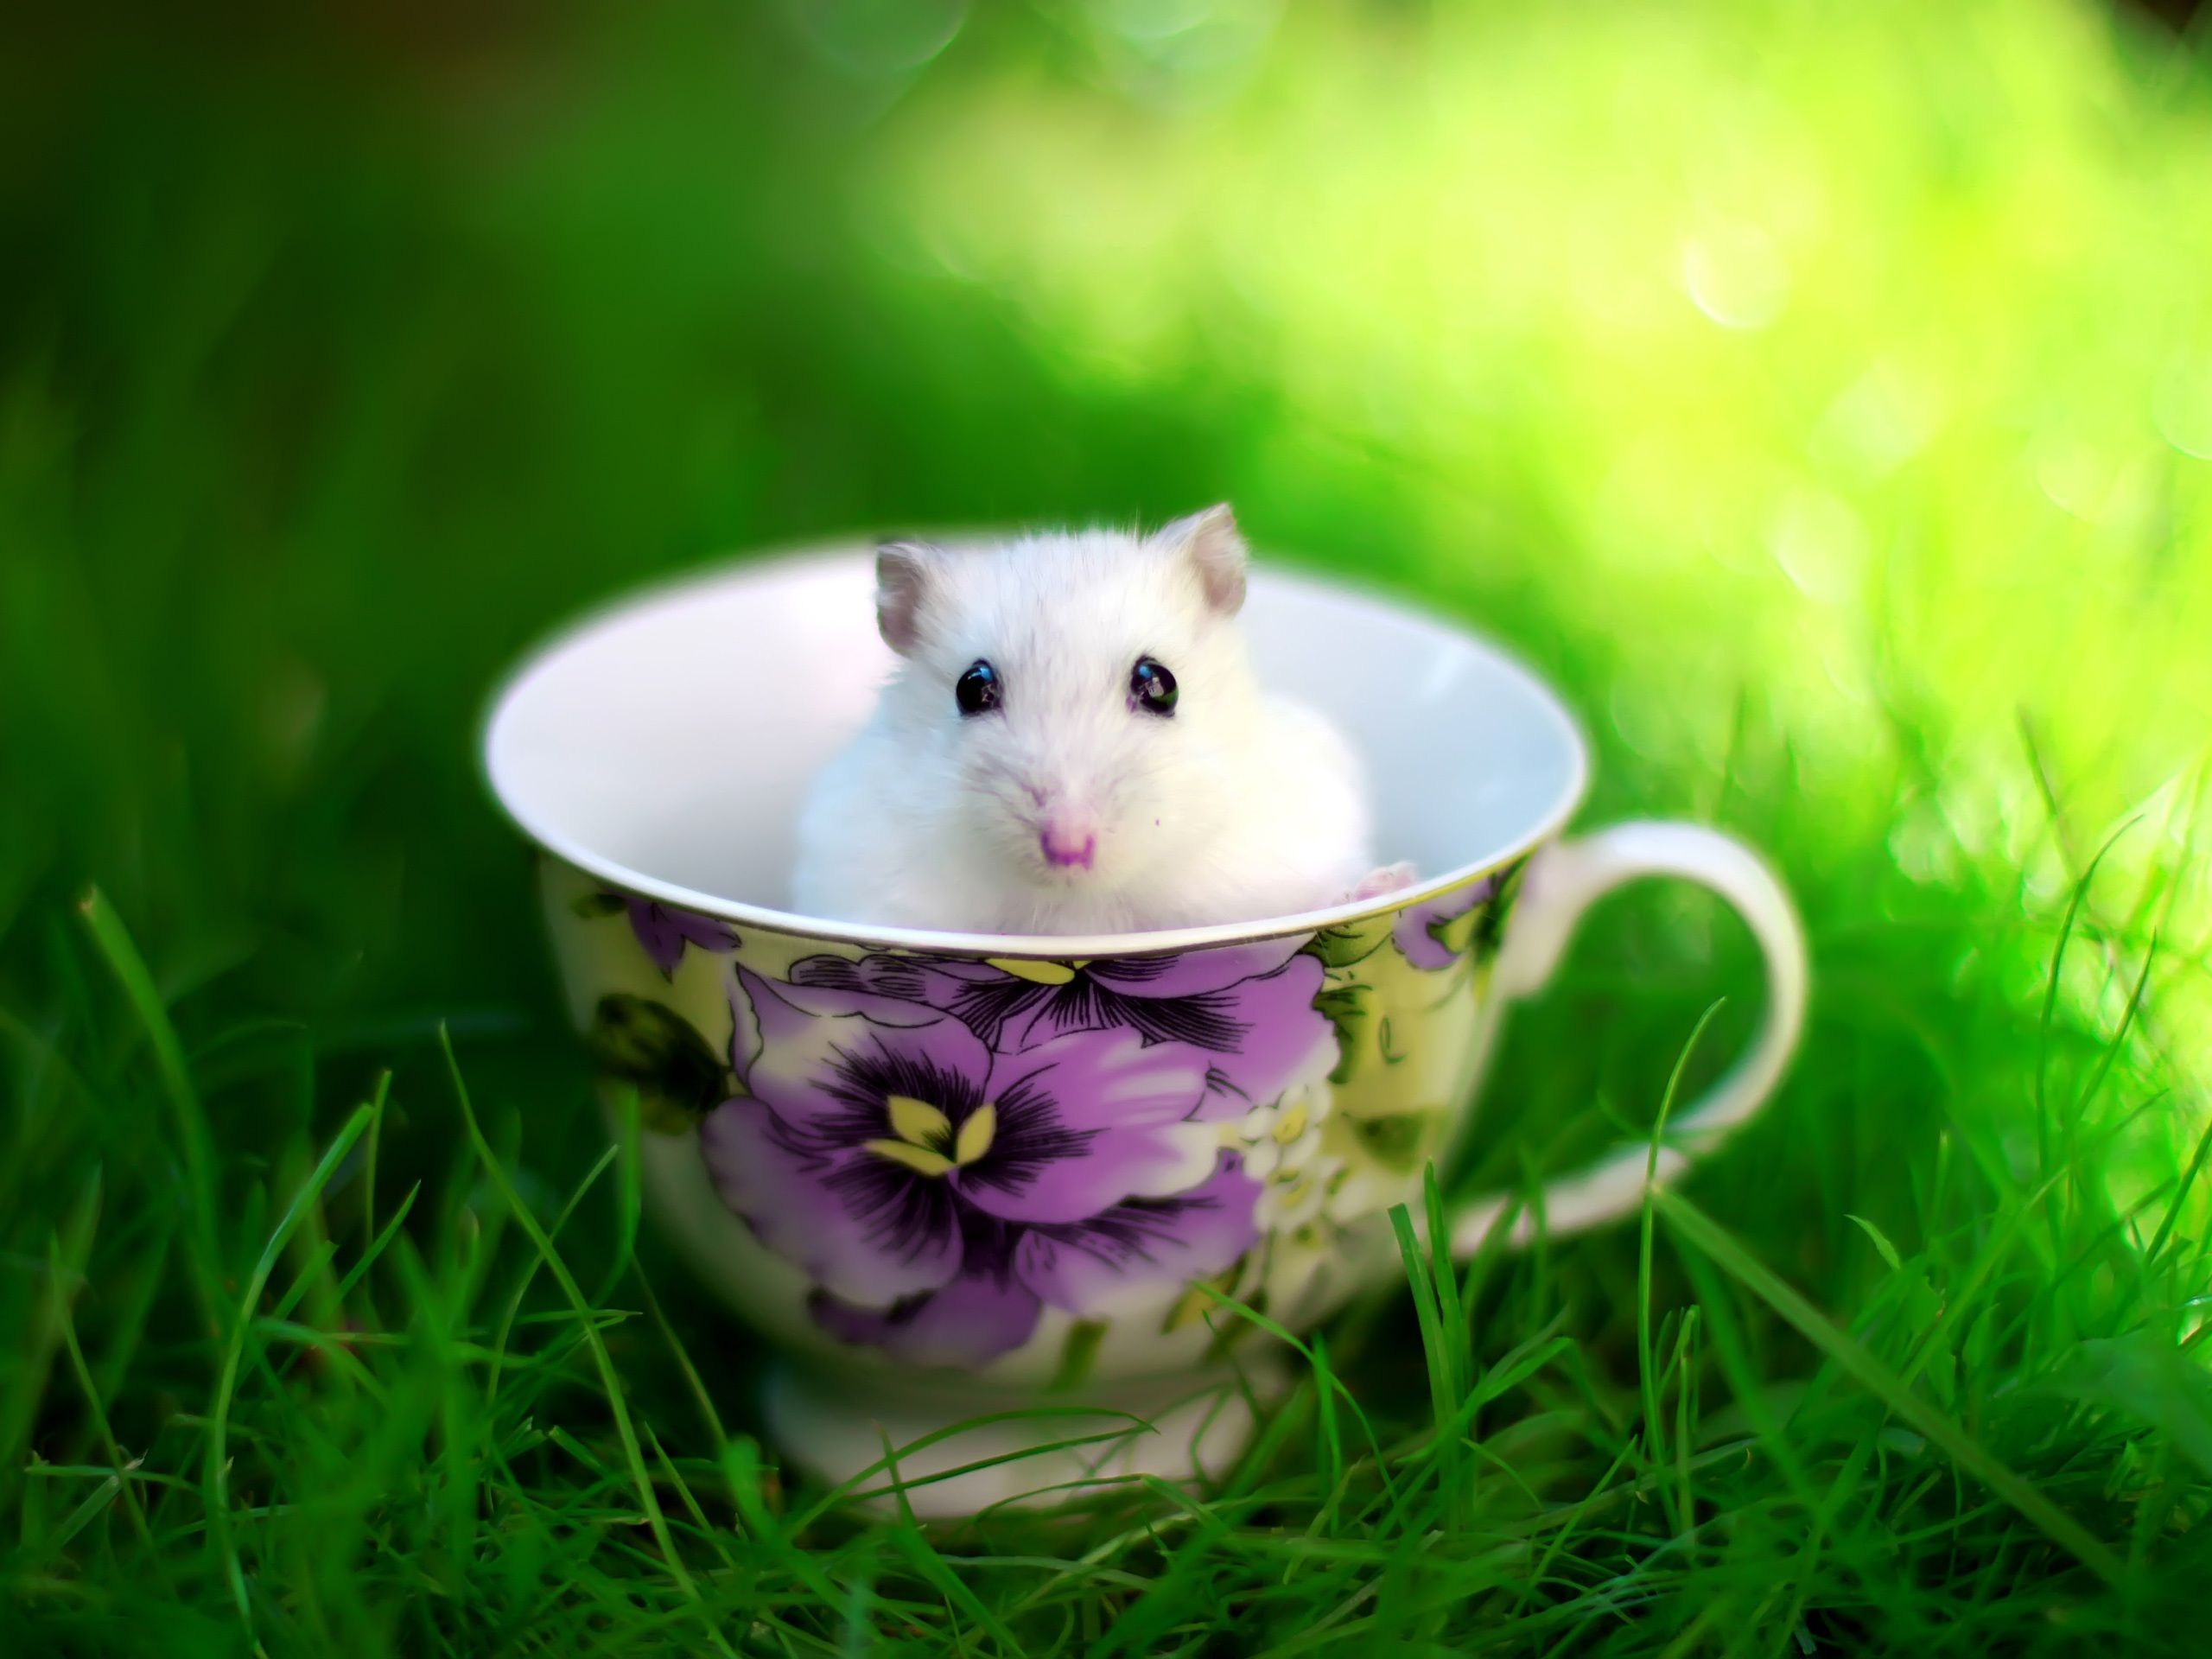 The lovely mice in the teacup Wallpaper 2560x1920 resolution